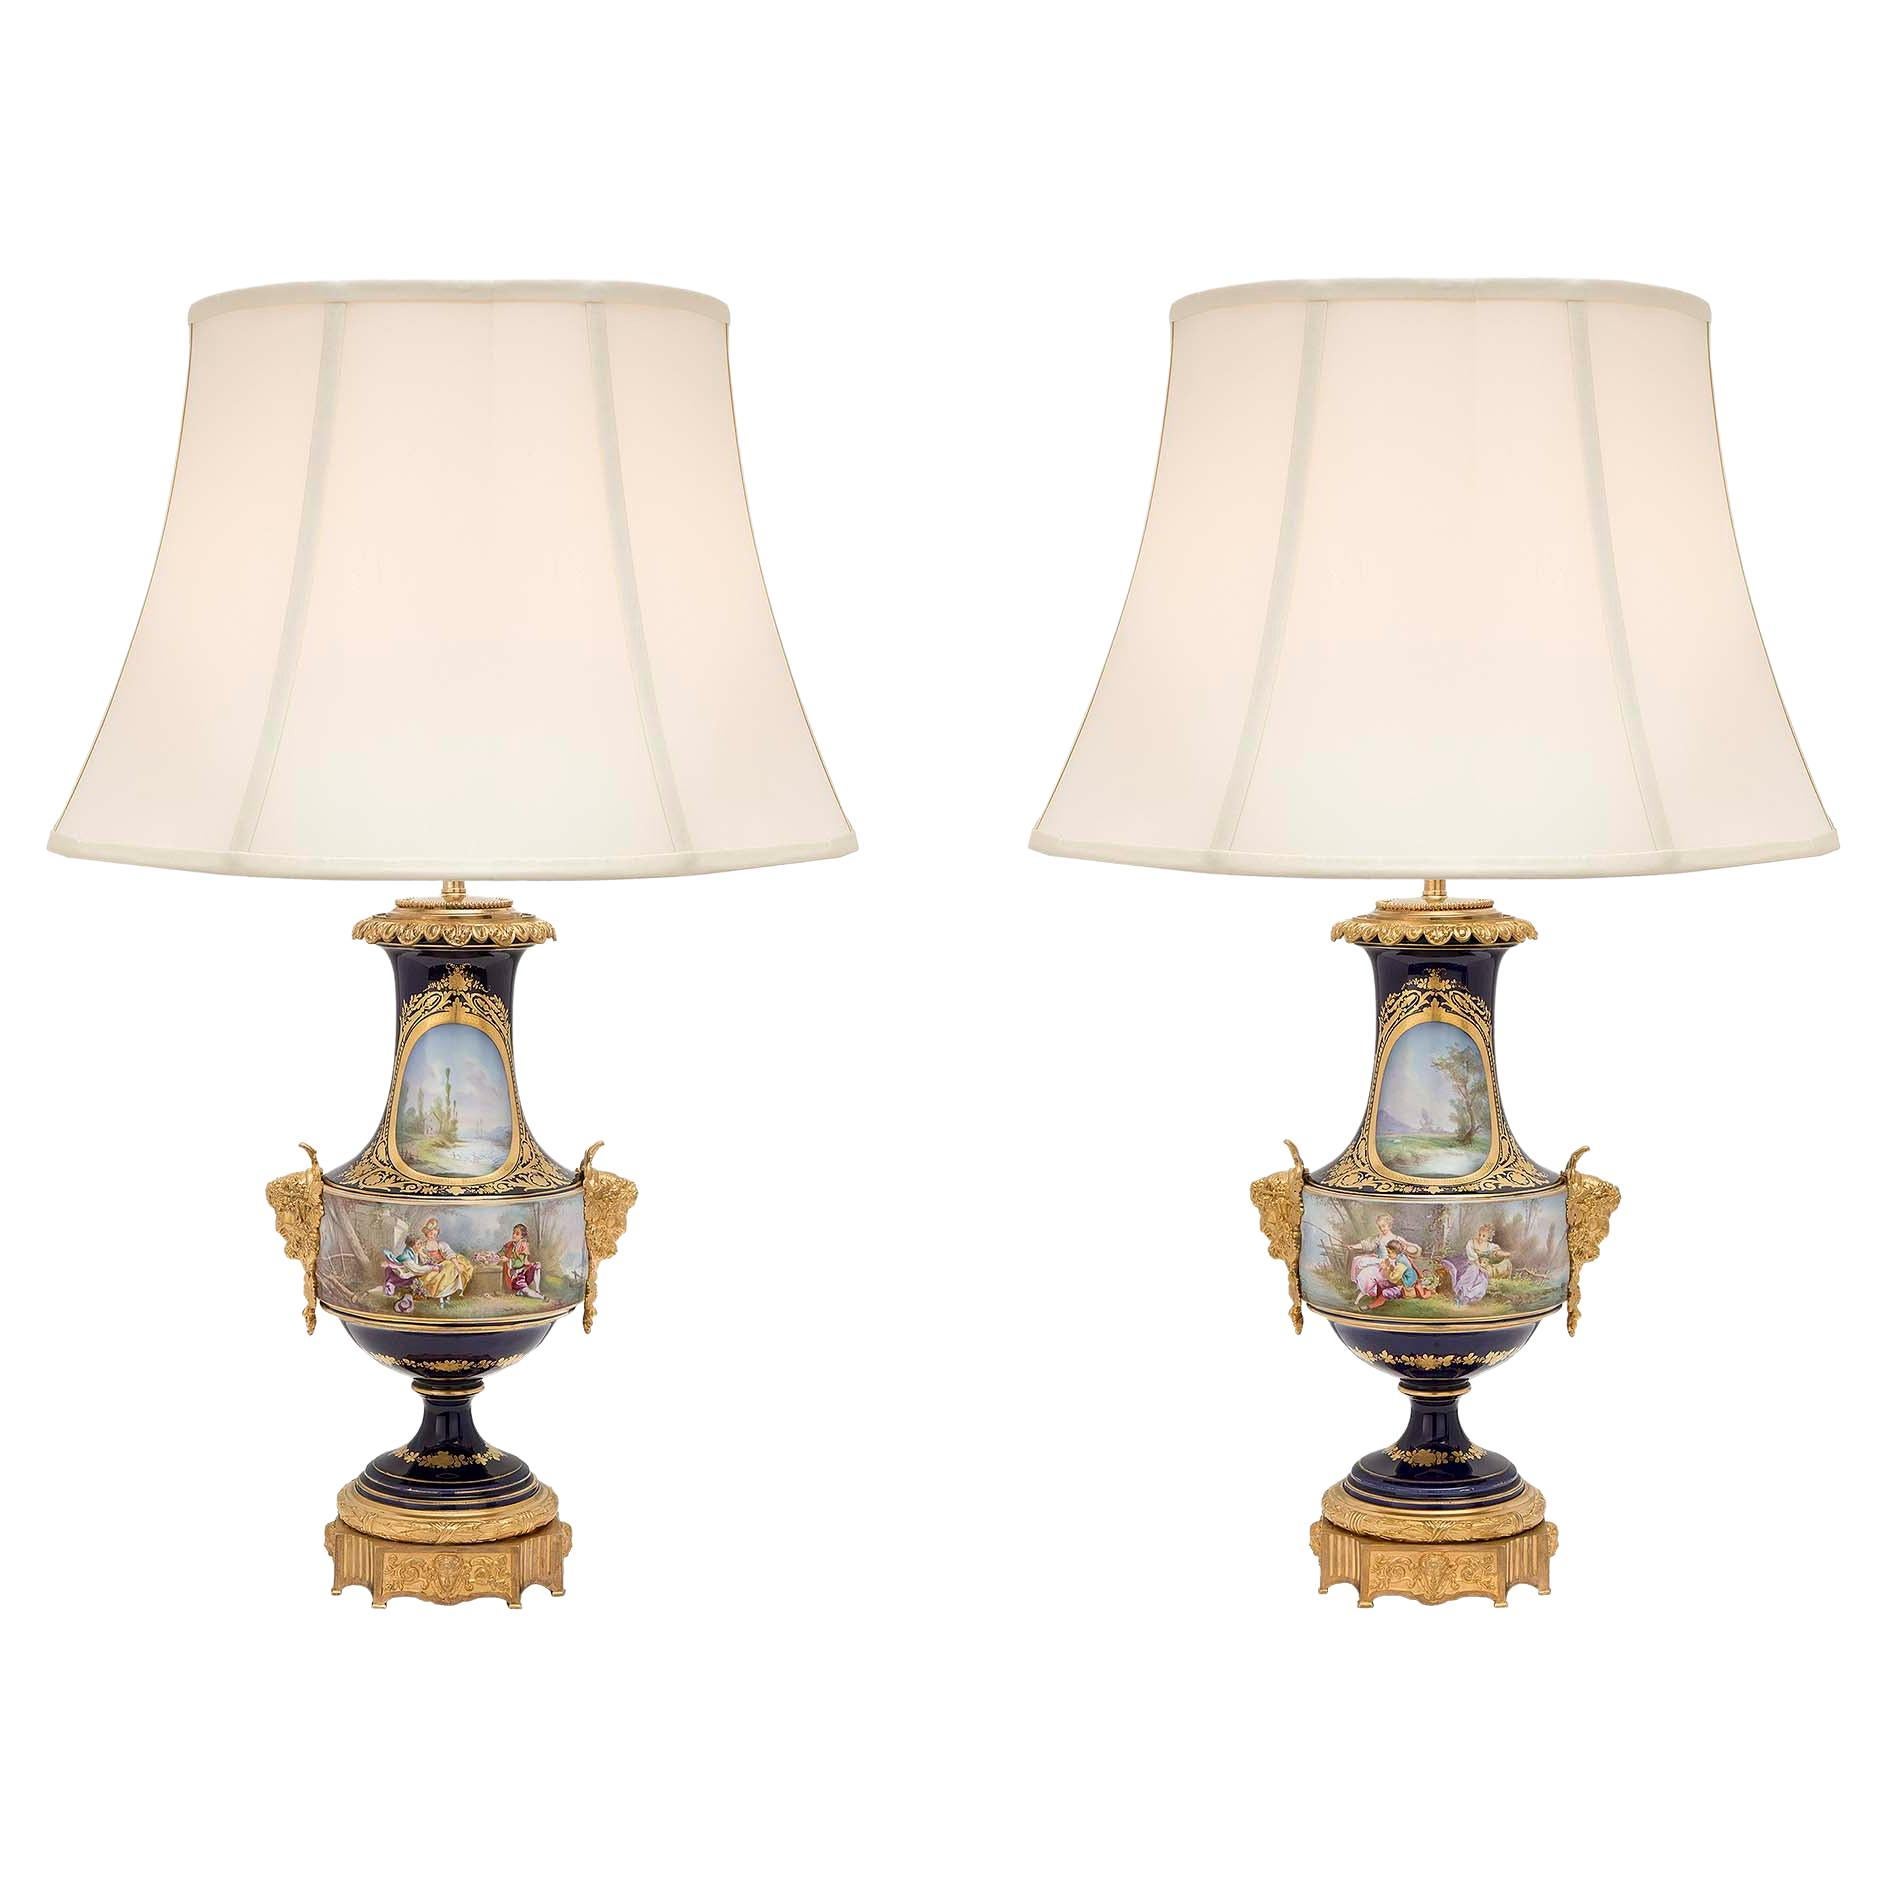 Pair of French 19th Century Louis XVI St. Sèvres Porcelain and Ormolu Lamps